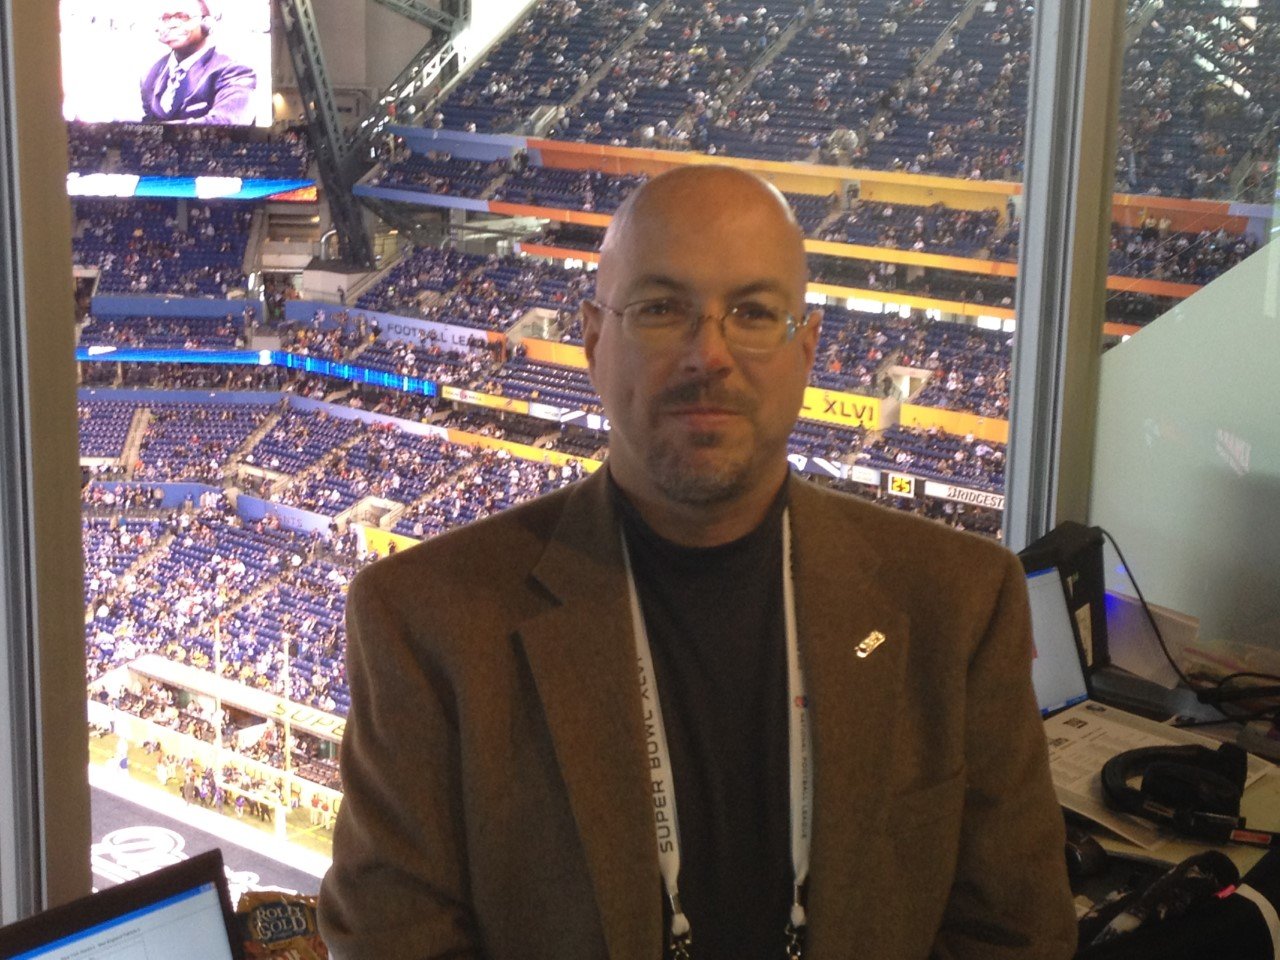 For the past 16 years Harris has been a key member of the Colts game day operations crew where he is the primary computer entry person as well as the Game Statistics Information System entry technician.